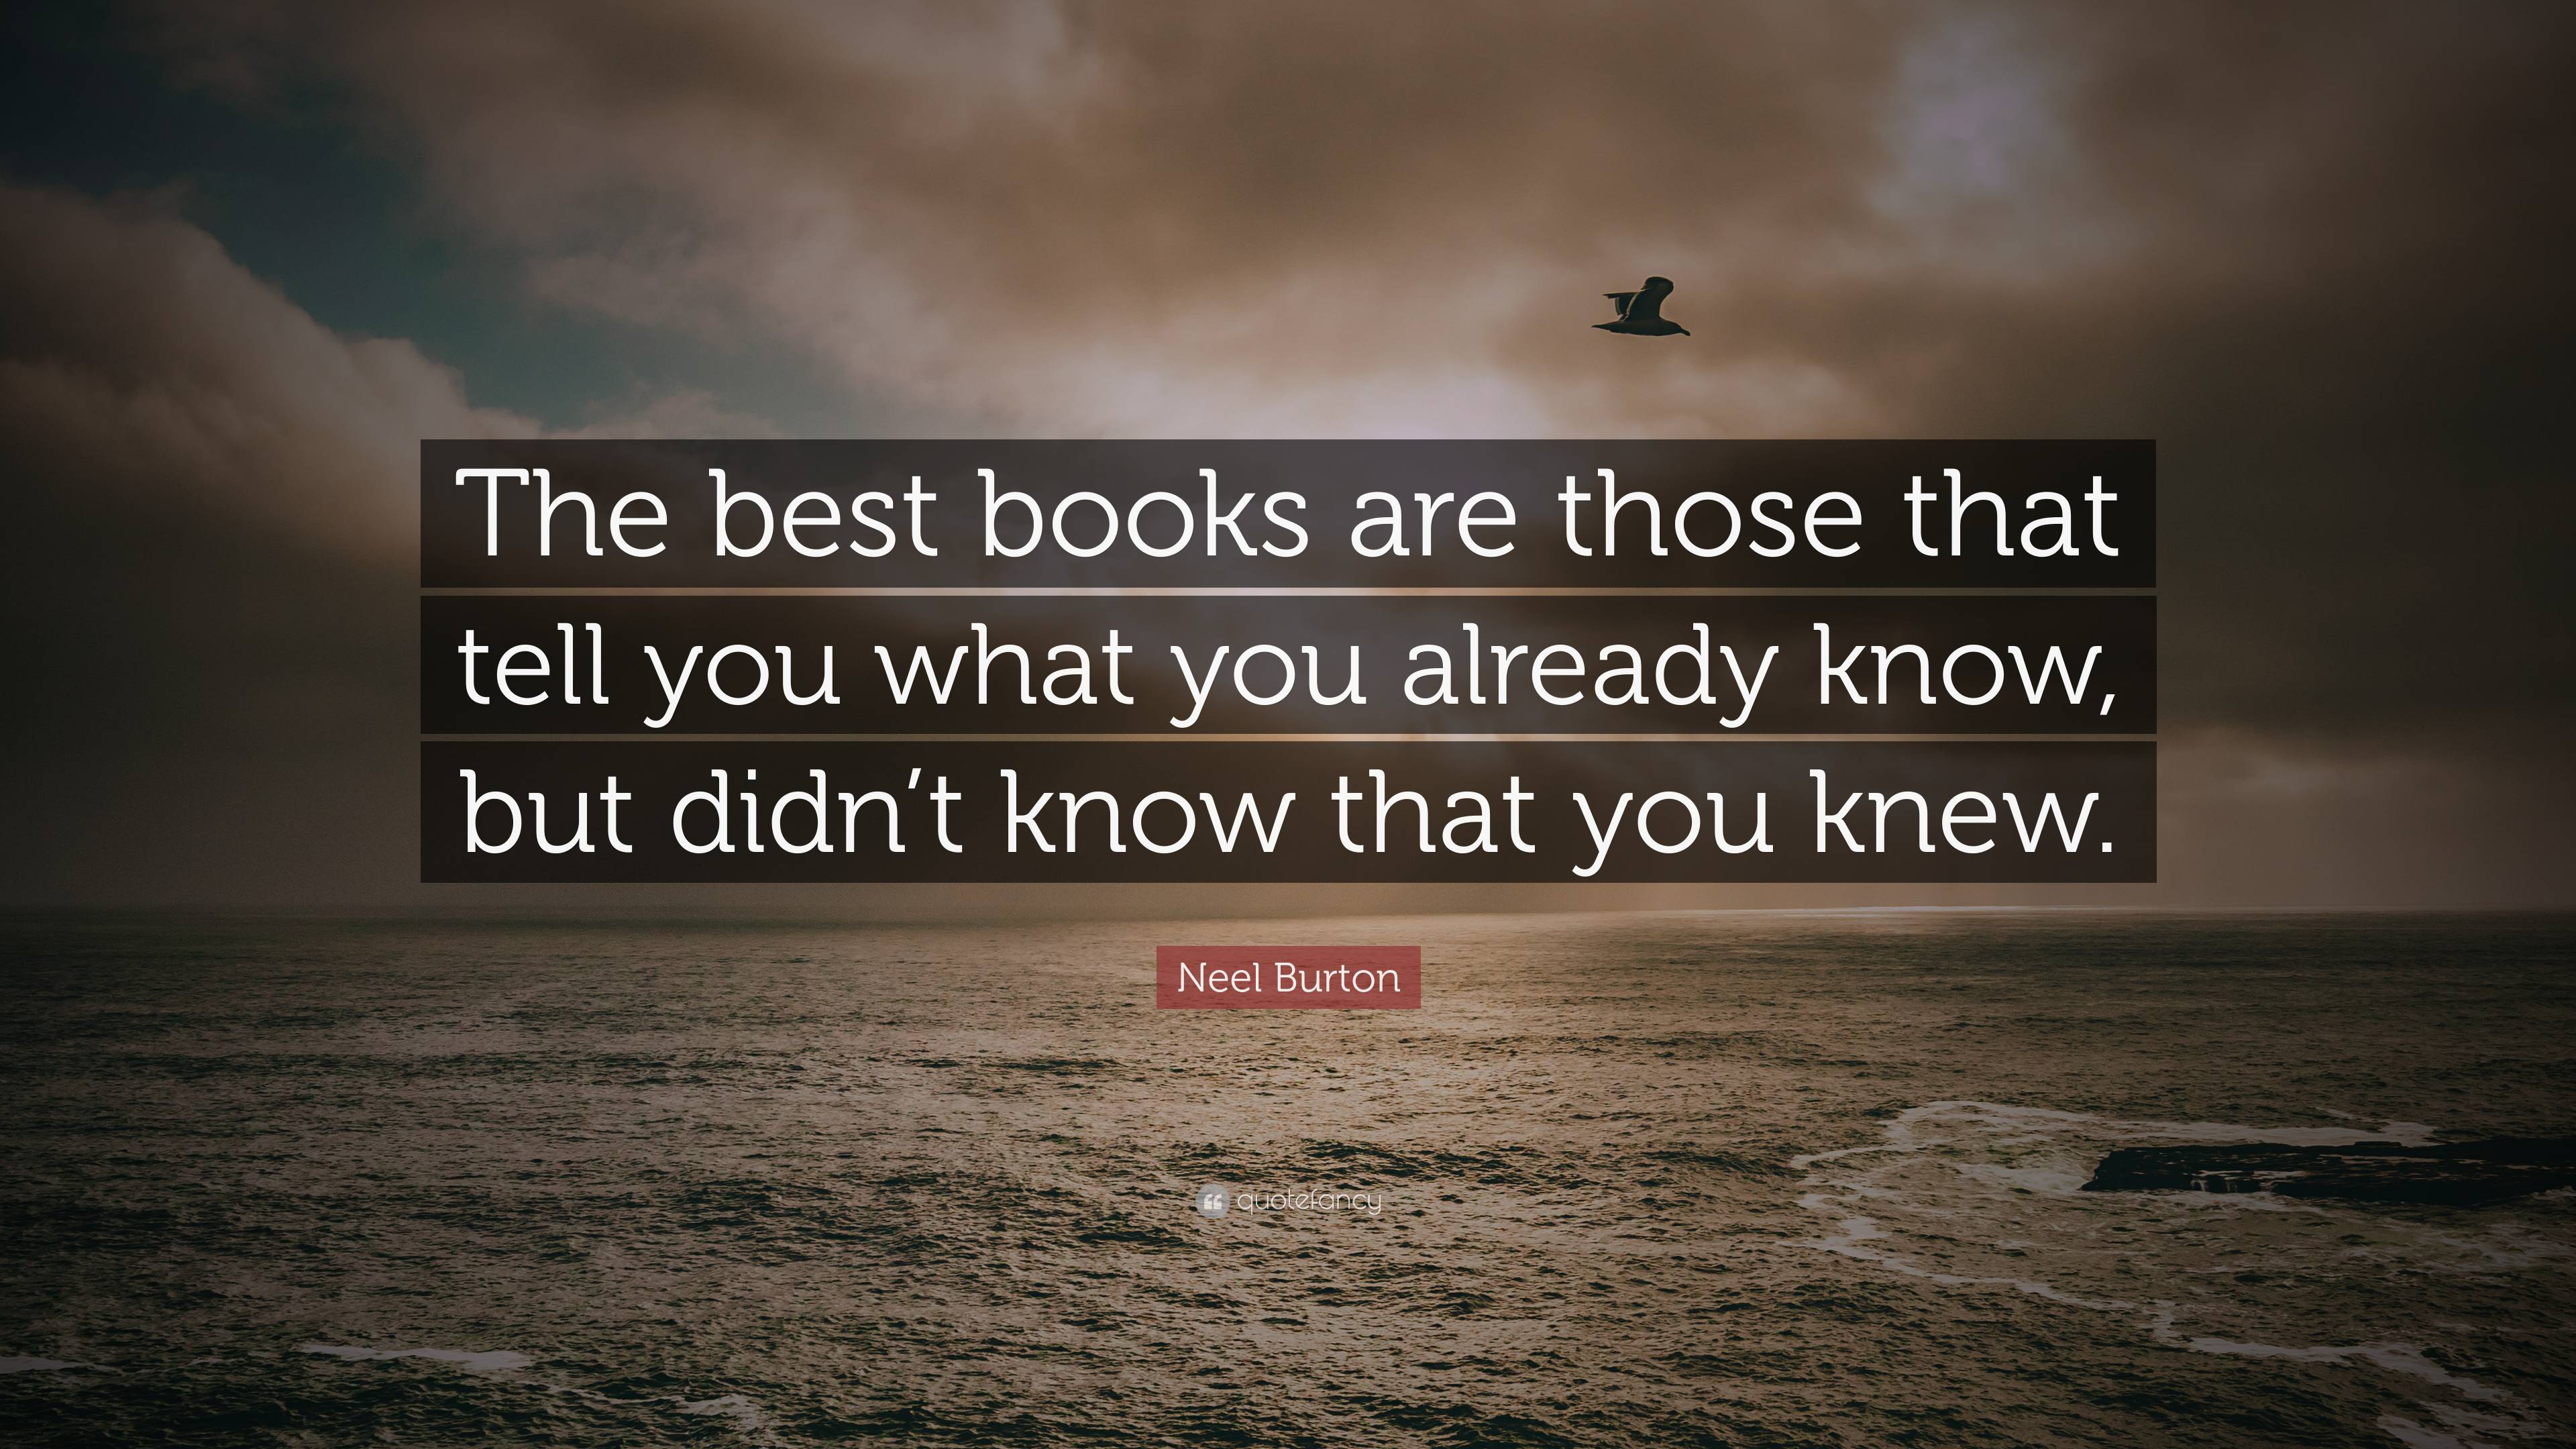 Neel Burton Quote: “The best books are those that tell you what you ...